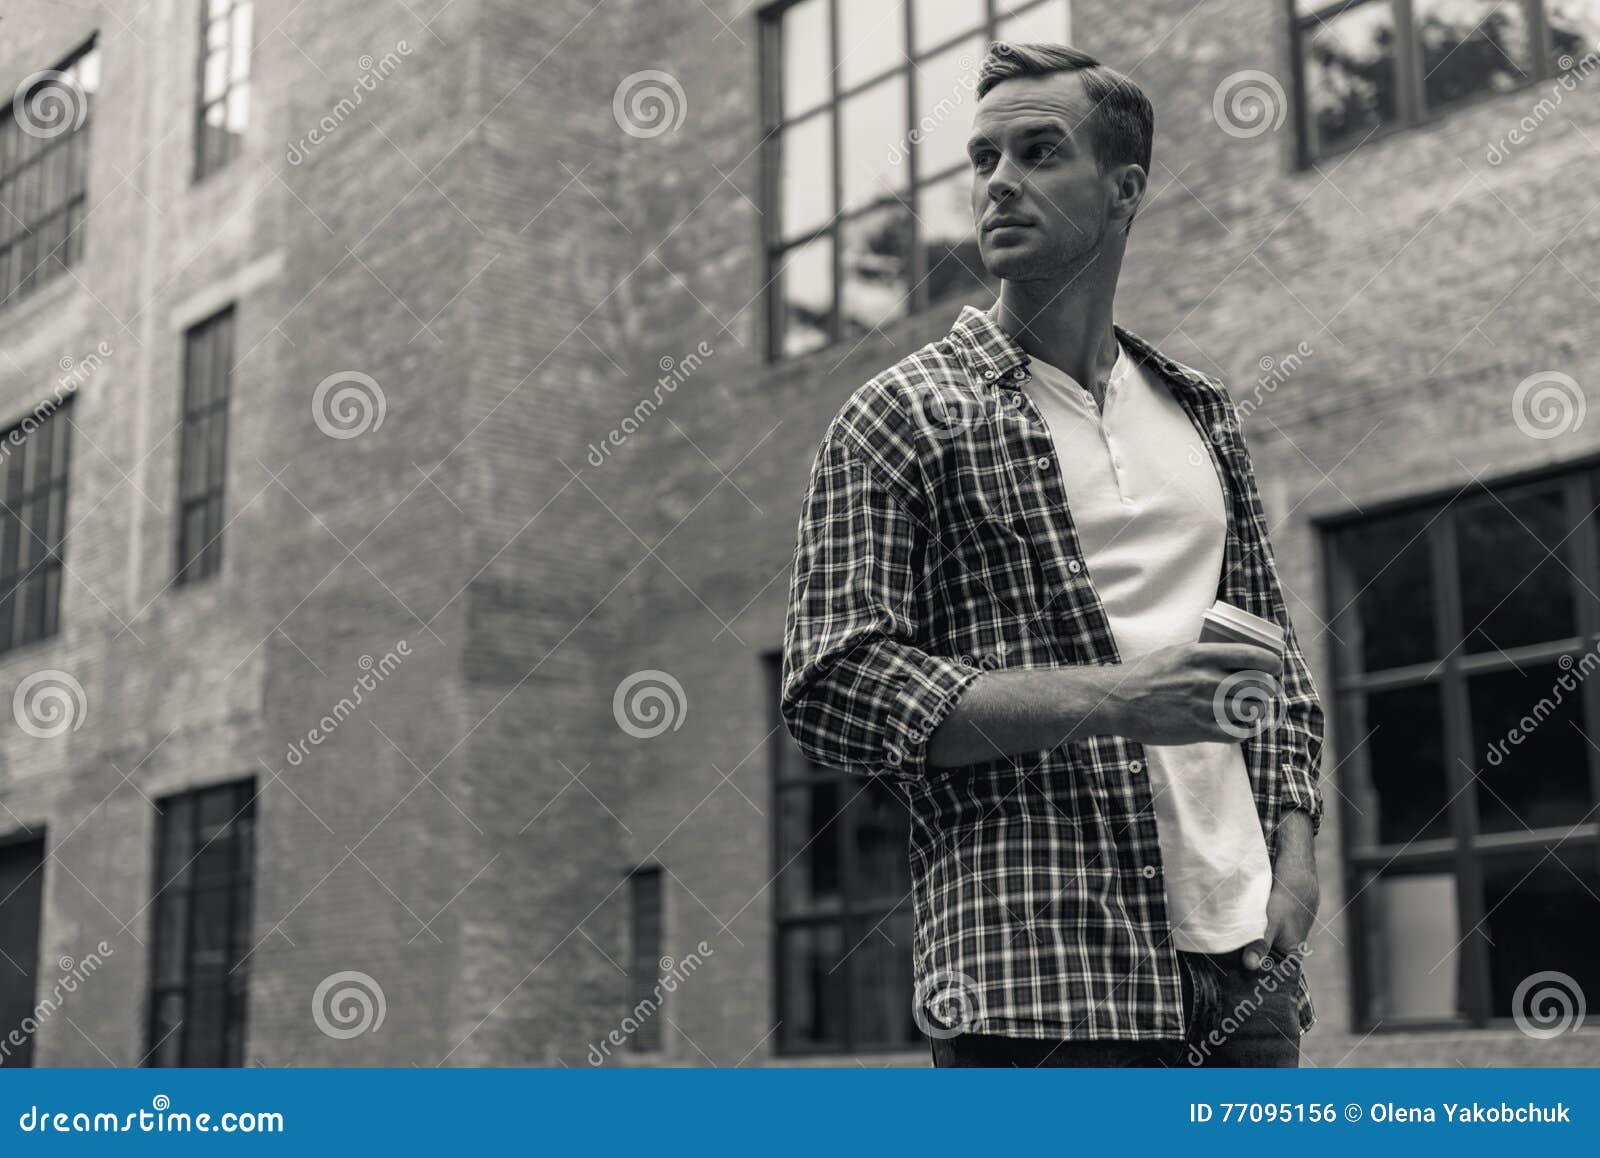 Handsome Young Man Spending Day in City Stock Photo - Image of shot ...